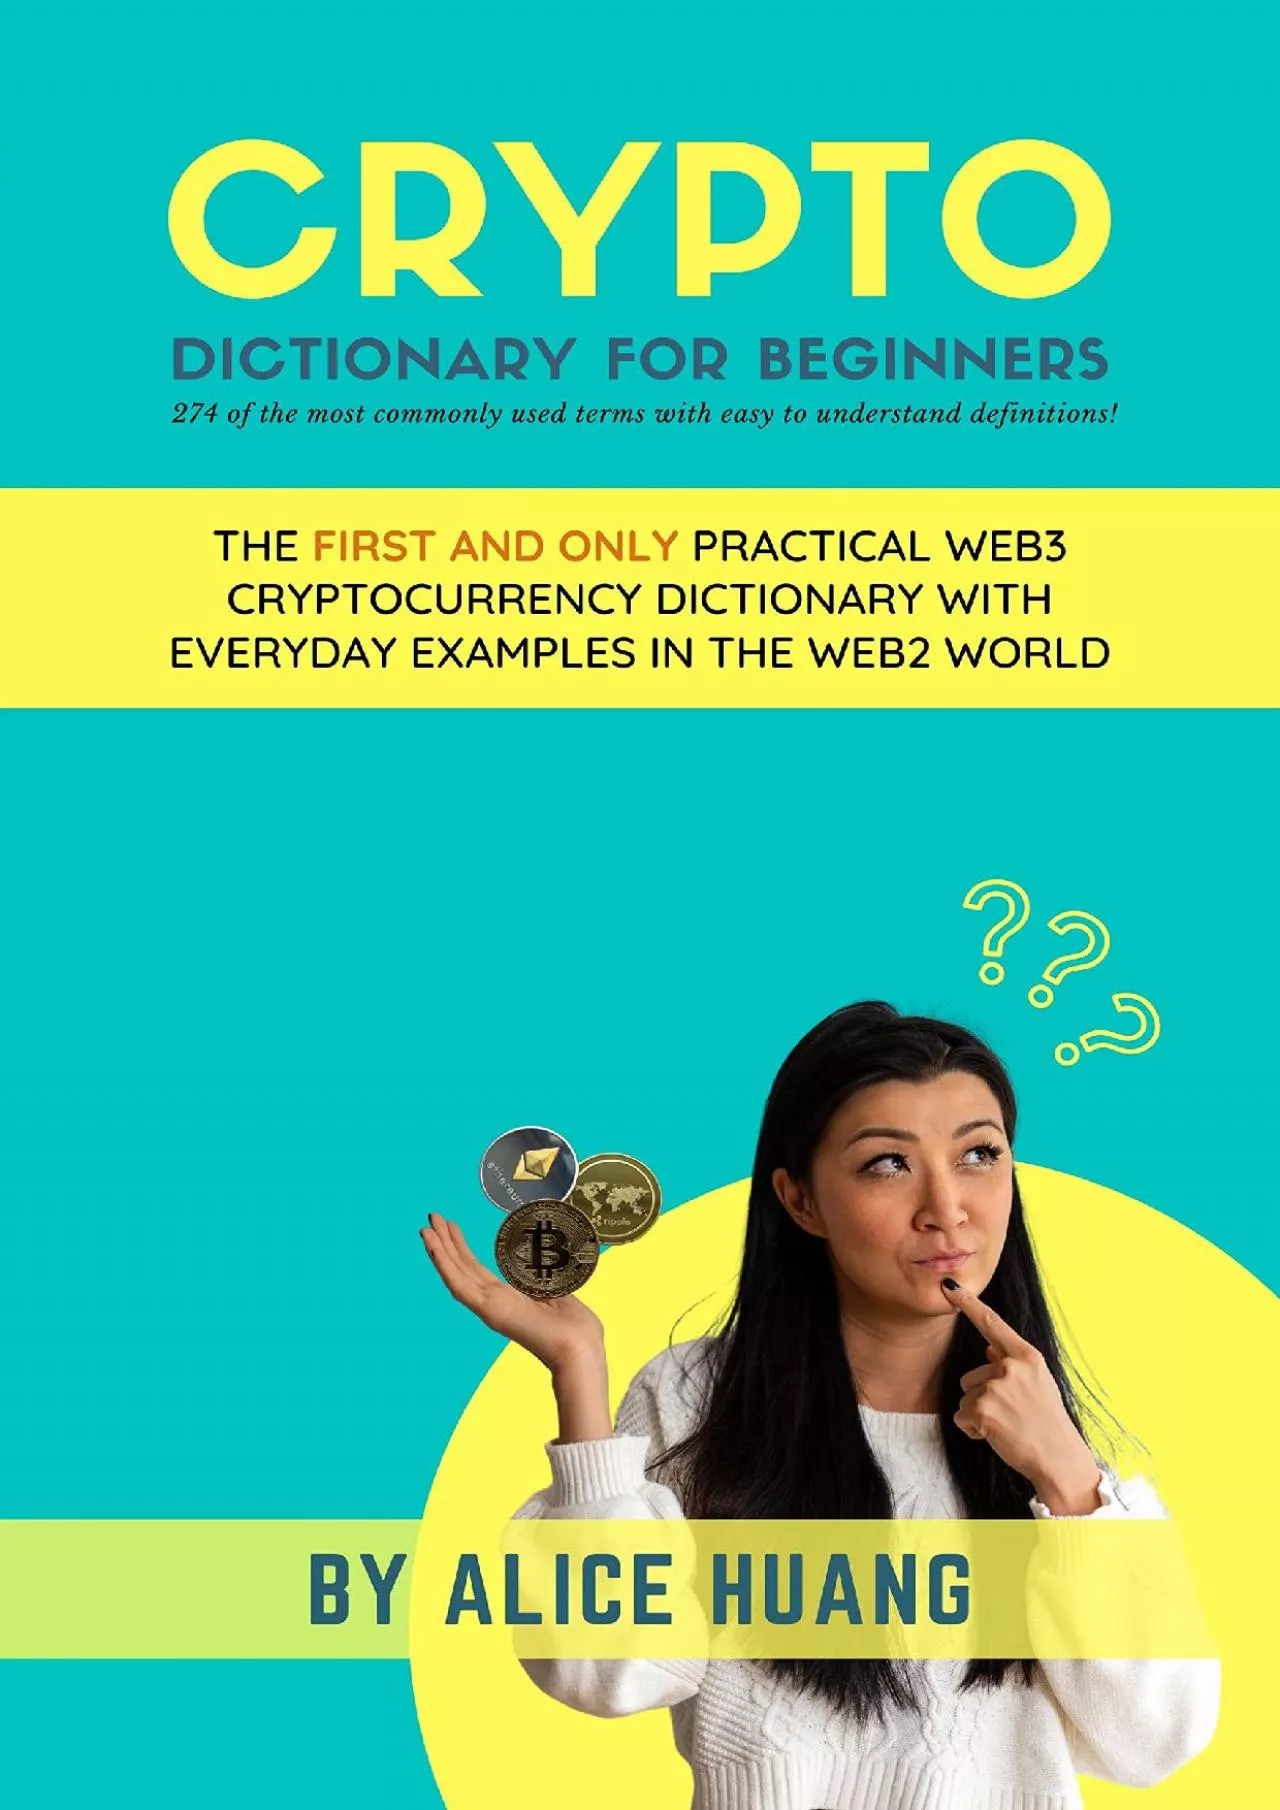 (EBOOK)-Crypto Dictionary for Beginners: The First and Only Practical Web3 Cryptocurrency